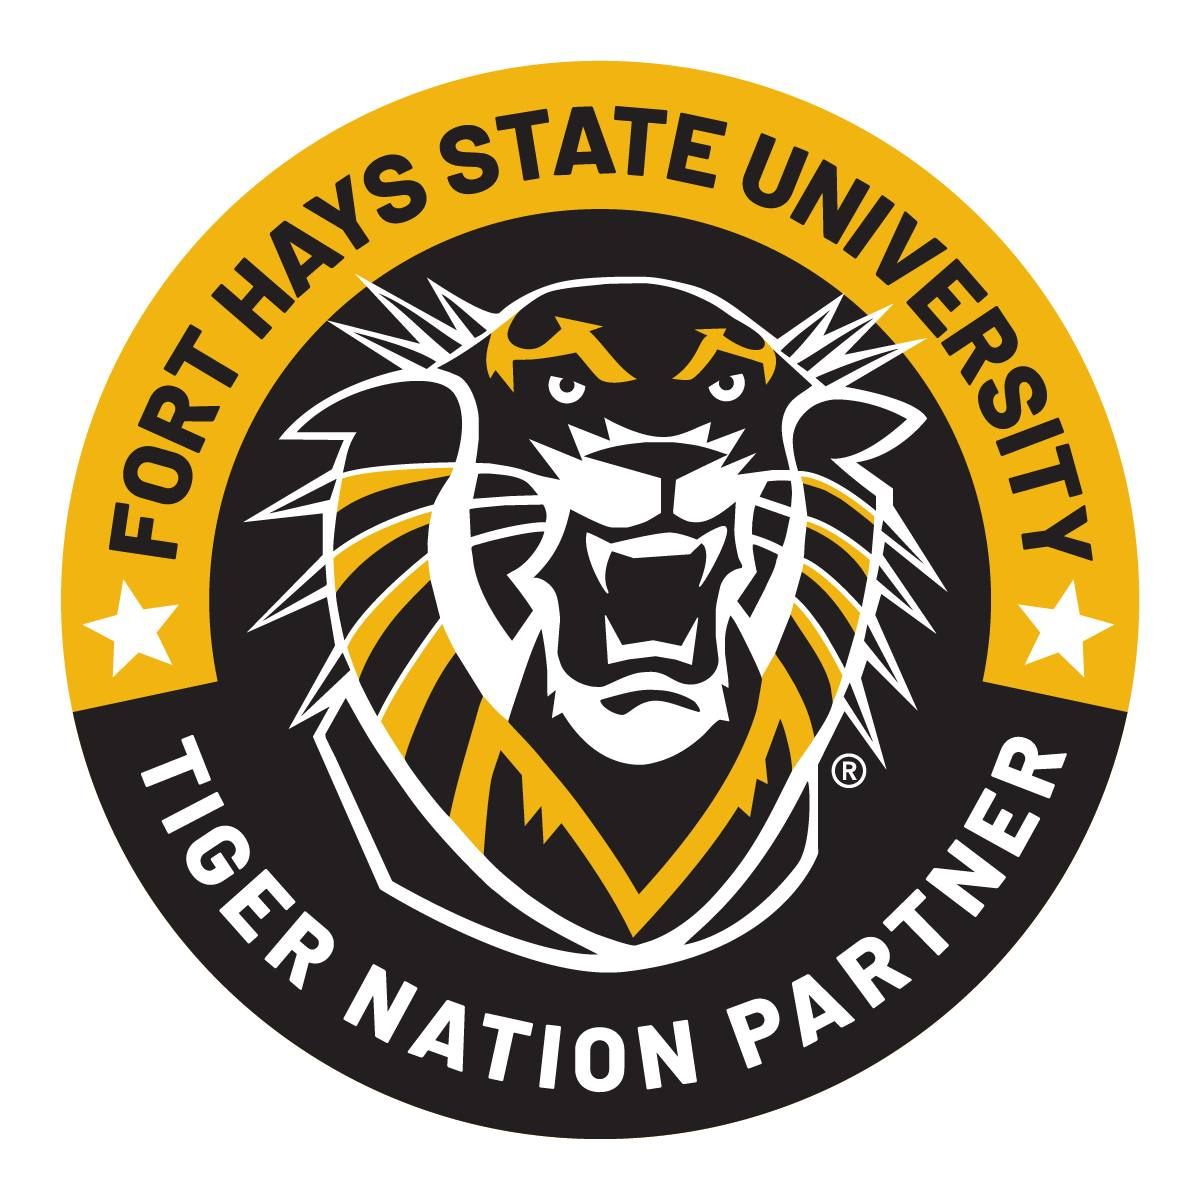 Chamber Chat - FHSU Office of the President, Tiger Nation Partner of the Year